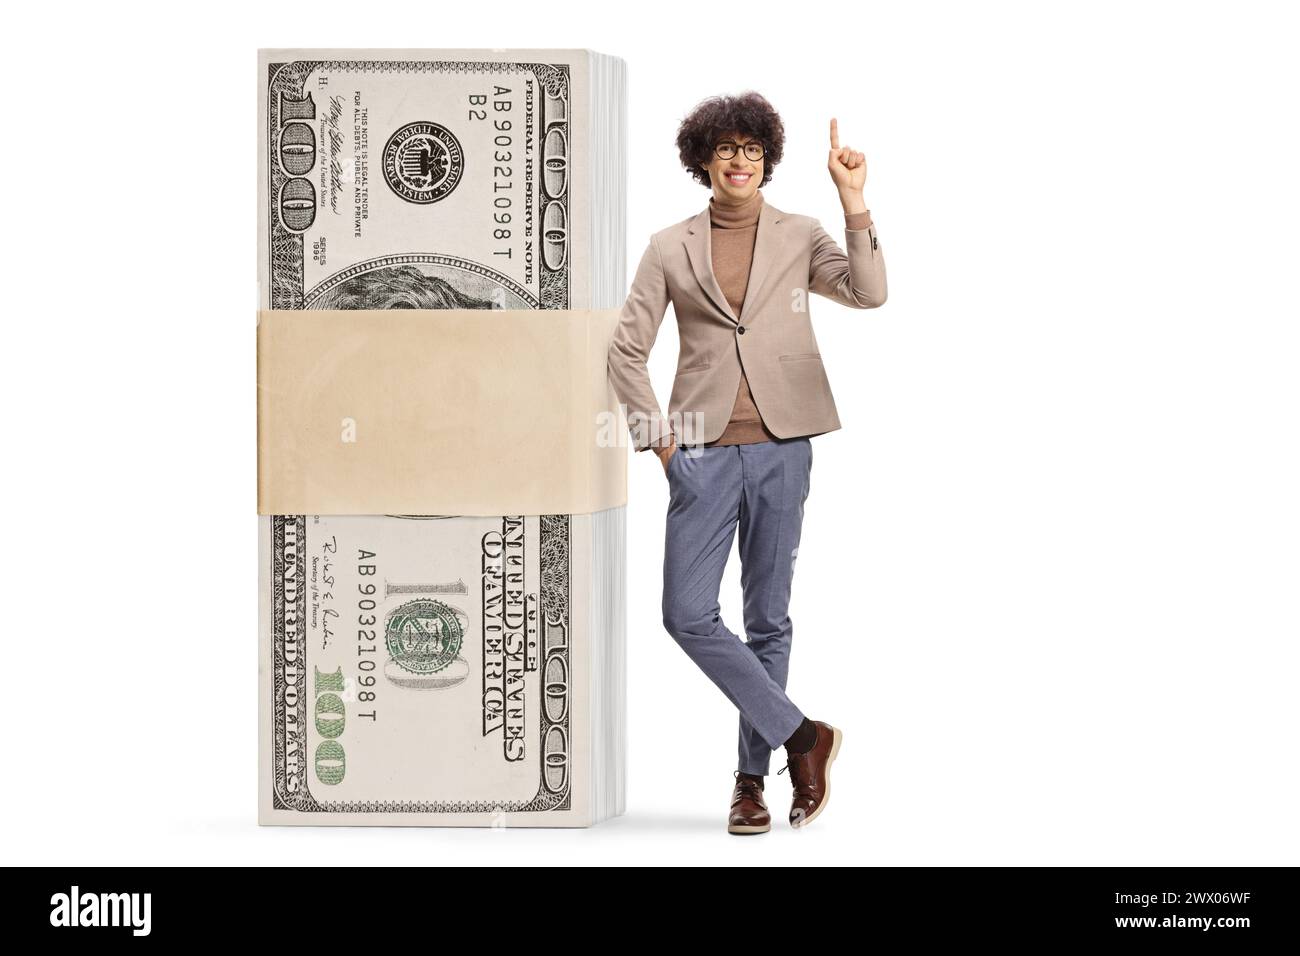 Young man next to a stack of money standing and pointing up isolated on white background Stock Photo